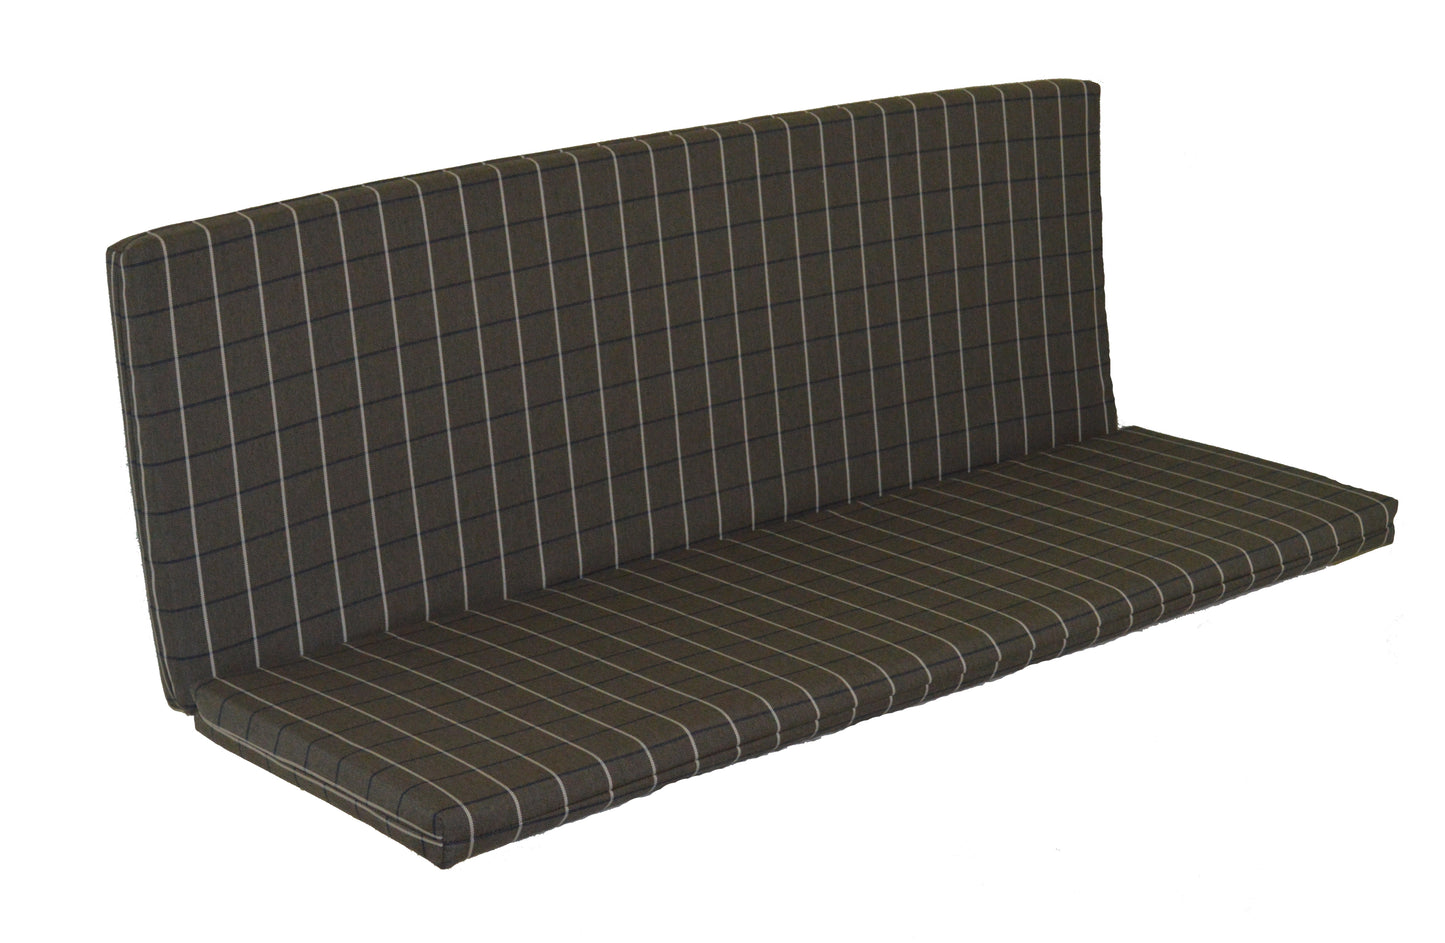 A&L Furniture Co. 6' Full Bench Cushion - LEAD TIME TO SHIP 10 BUSINESS DAYS